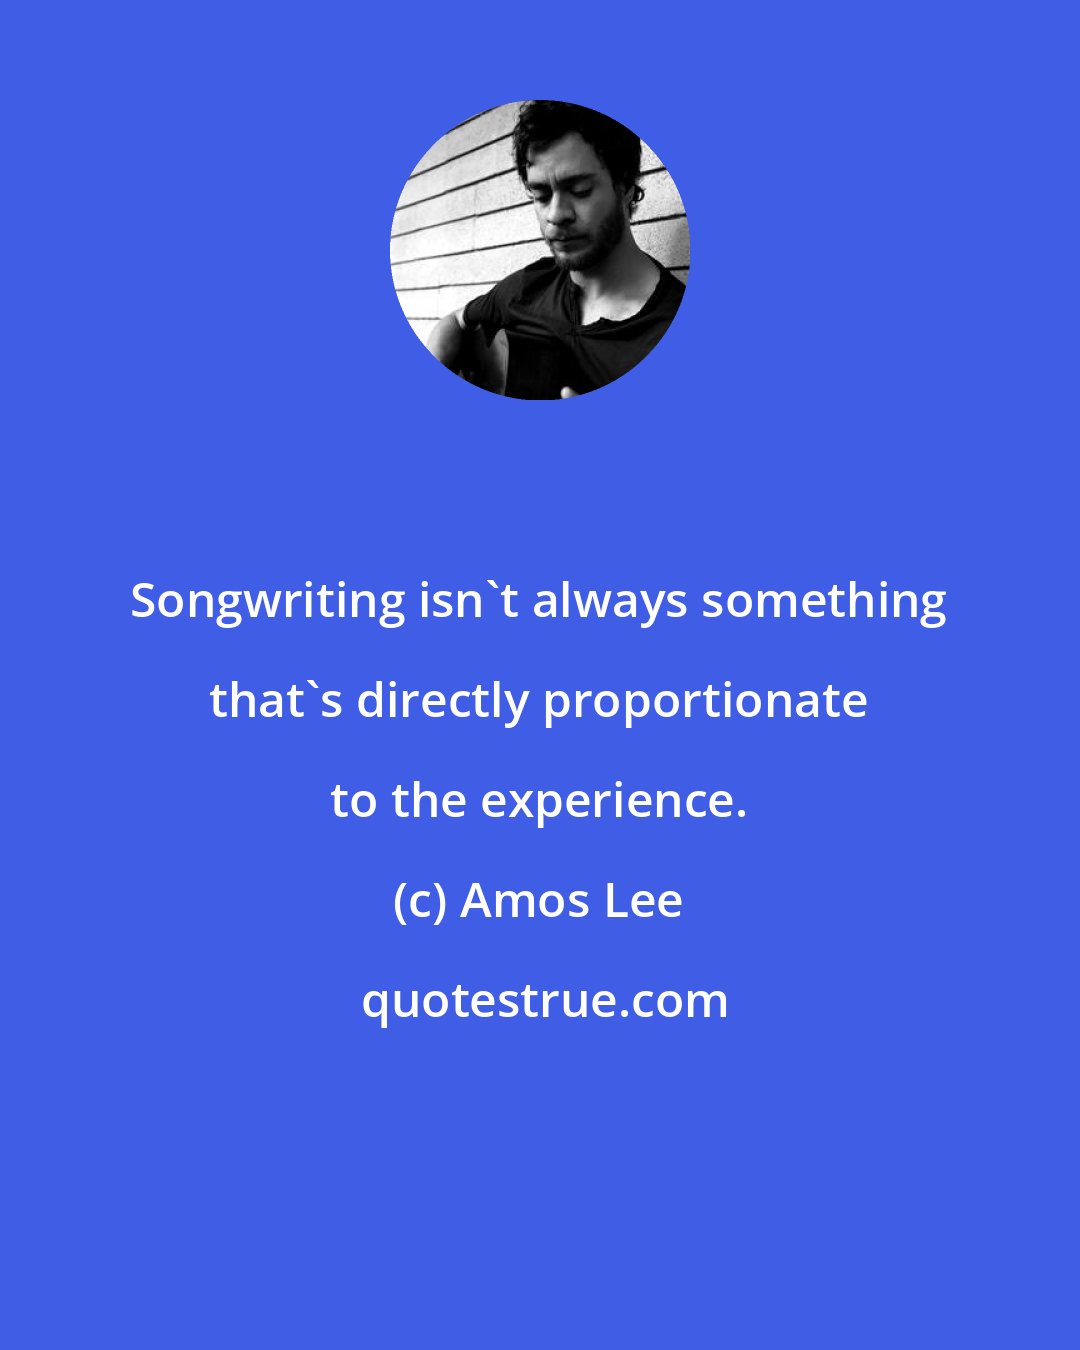 Amos Lee: Songwriting isn't always something that's directly proportionate to the experience.